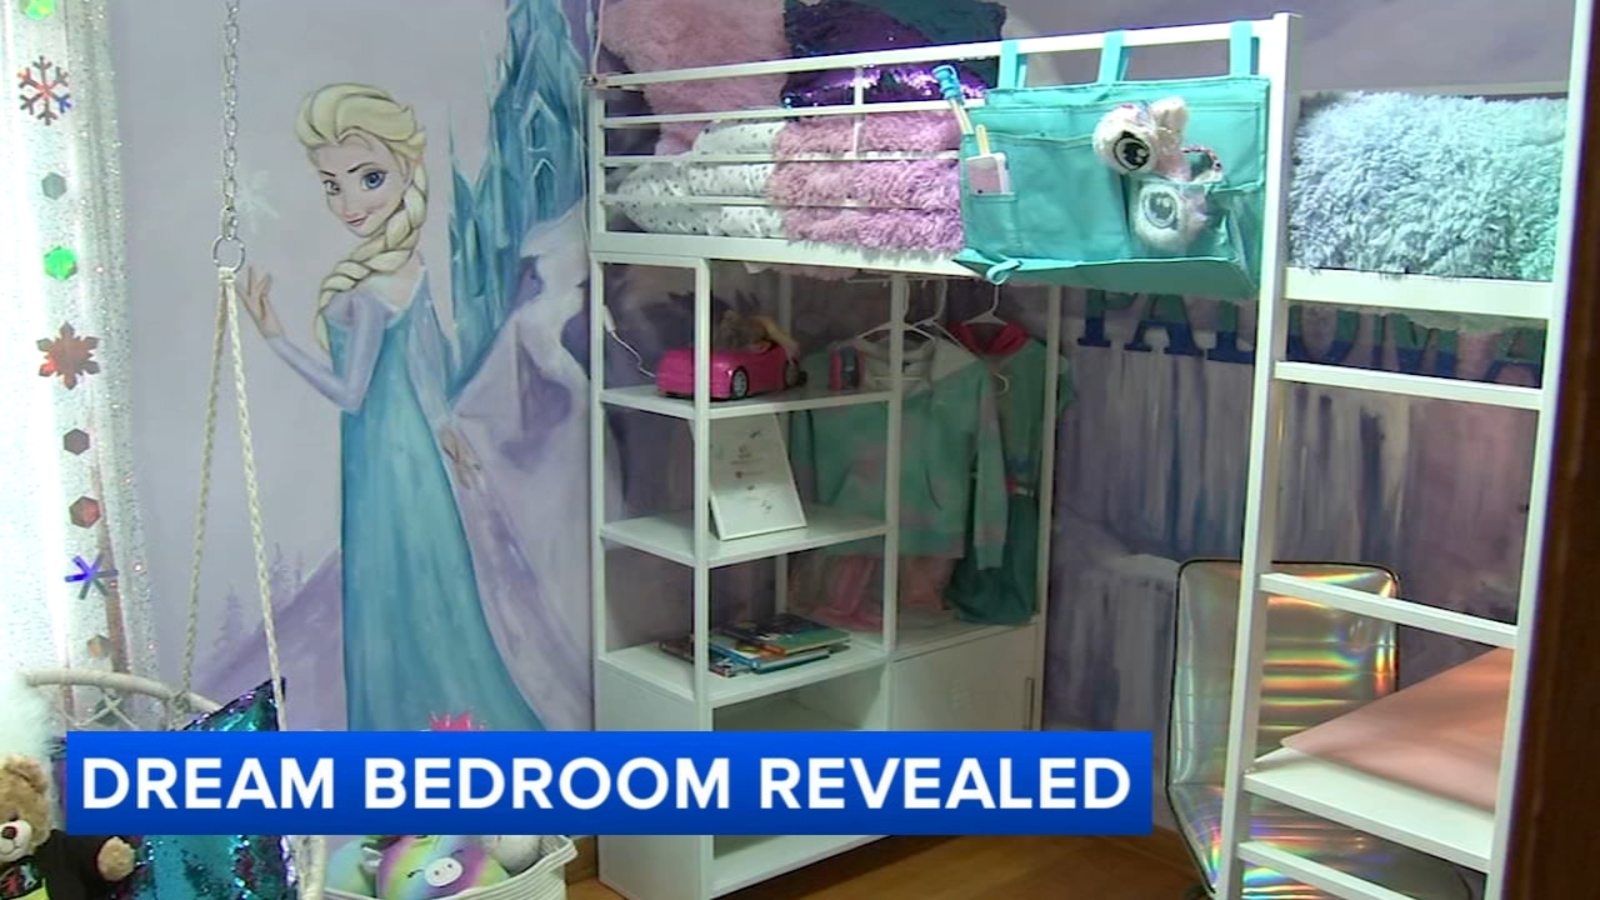 Special Spaces gives Paloma Saavedra, girl battling leukemia, ‘Frozen’ movie-themed bedroom makeover in Clearing, Chicago home [Video]